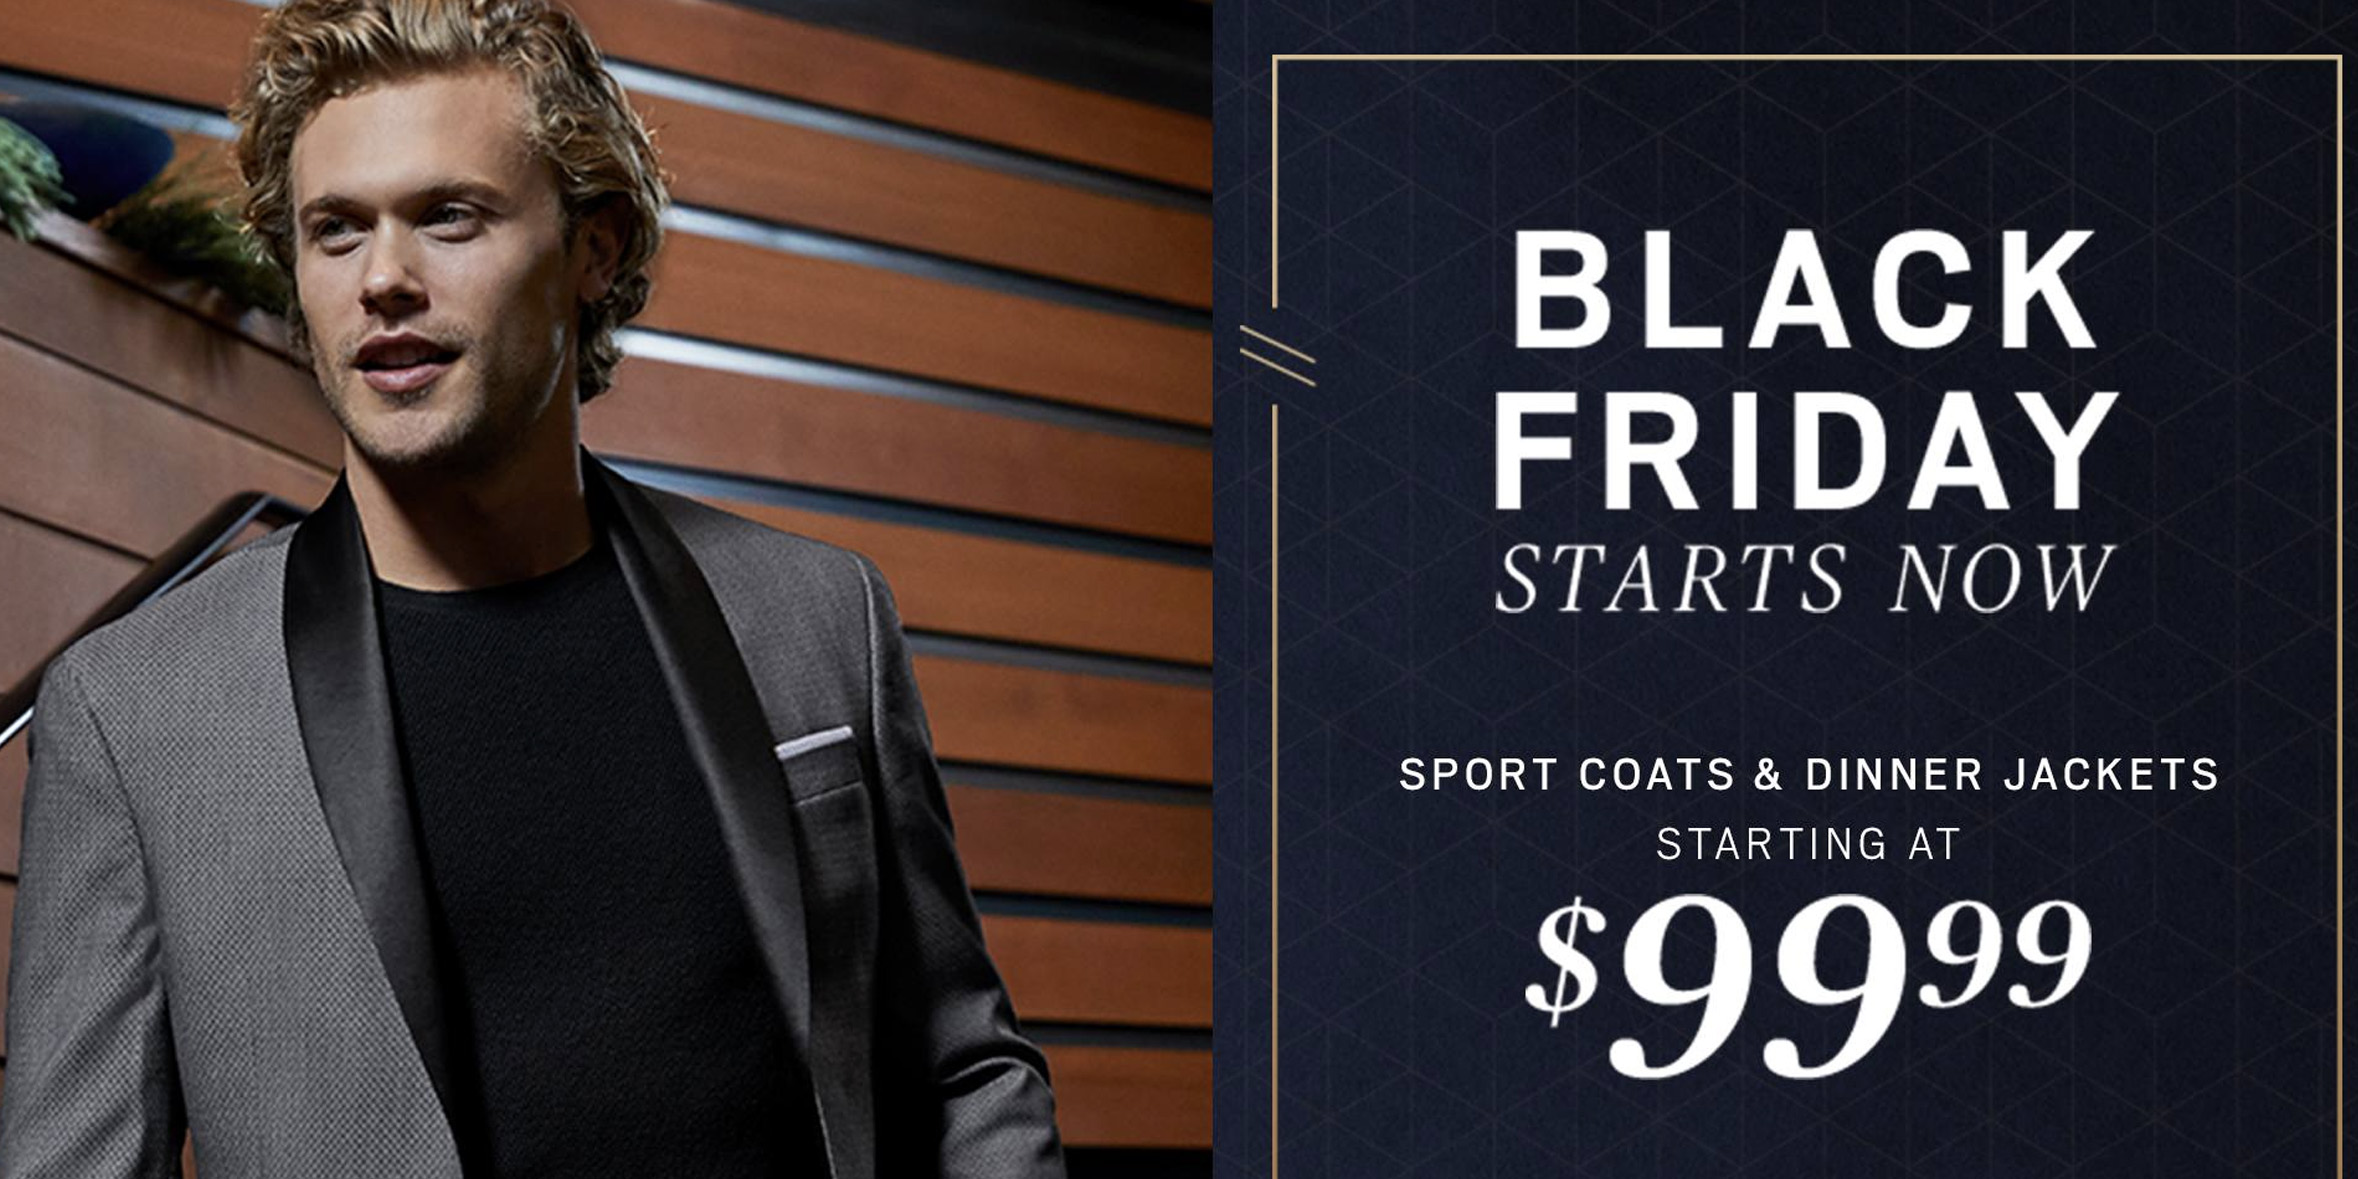 Men's Wearhouse Black Friday Deals are 